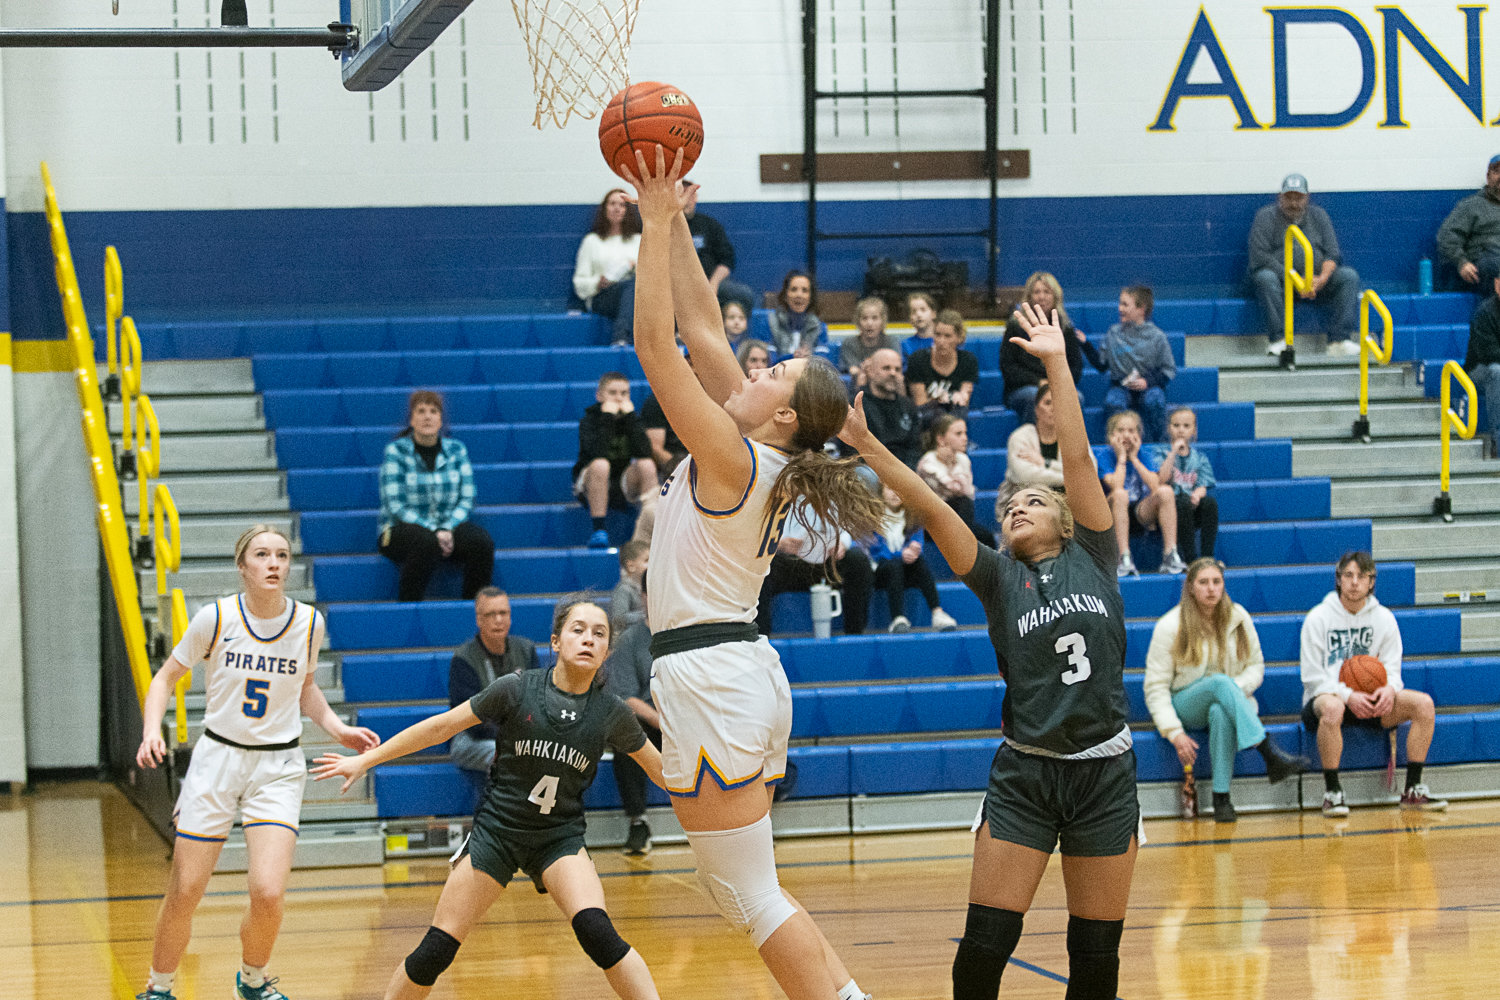 Karlee VonMoos goes up in the post for a bucket during the first quarter of Adna's 72-28 win over Wahkiakum on Jan. 13.